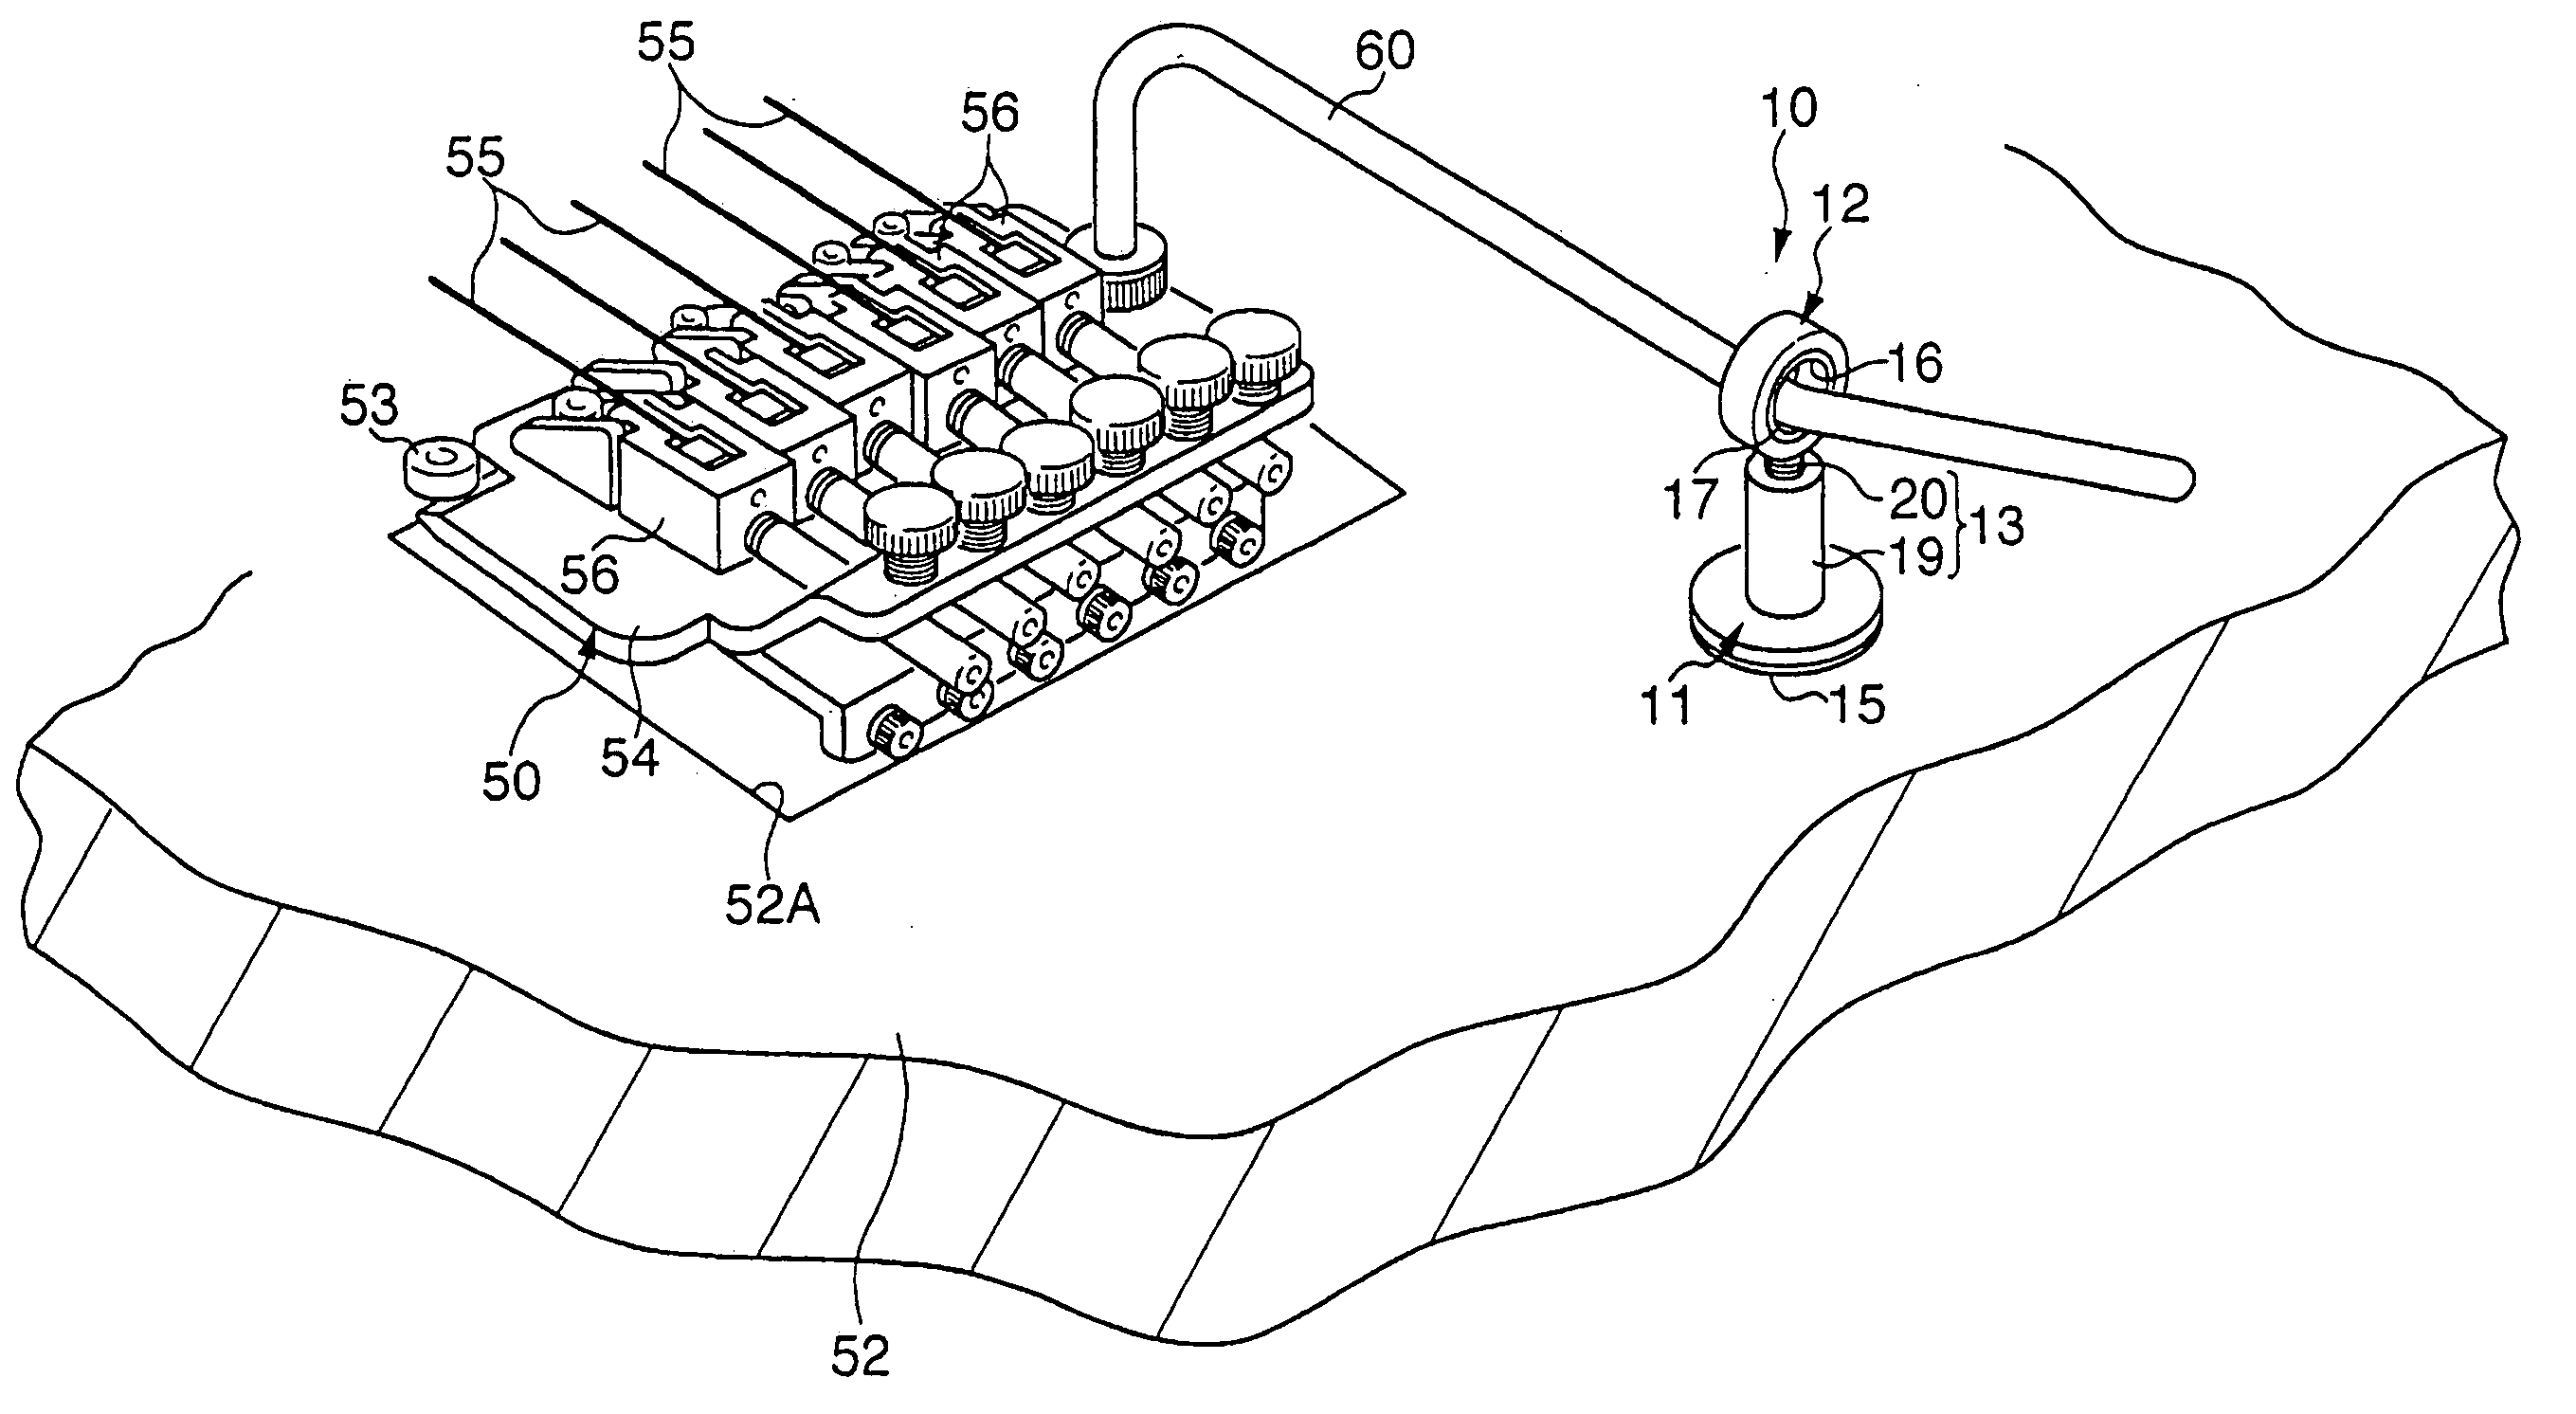 String replacement assistance apparatus